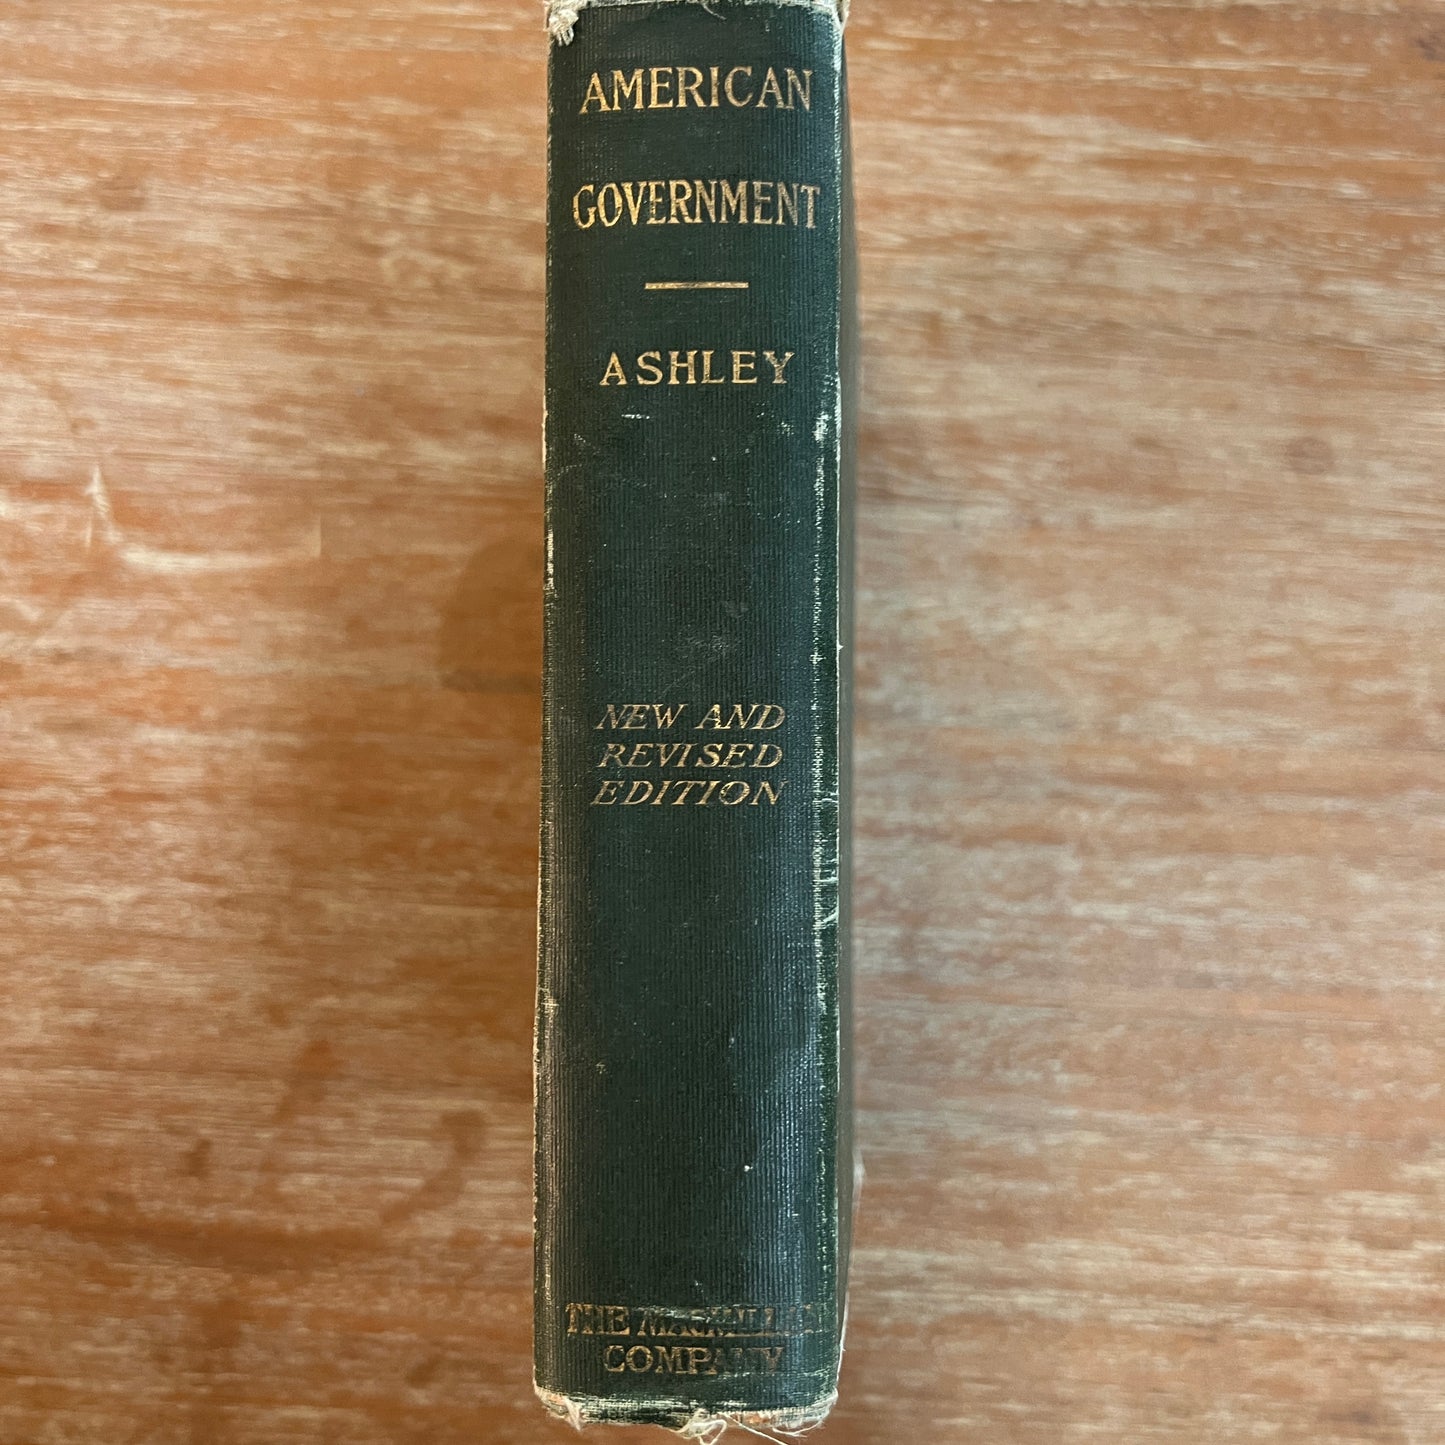 Vintage American Government book